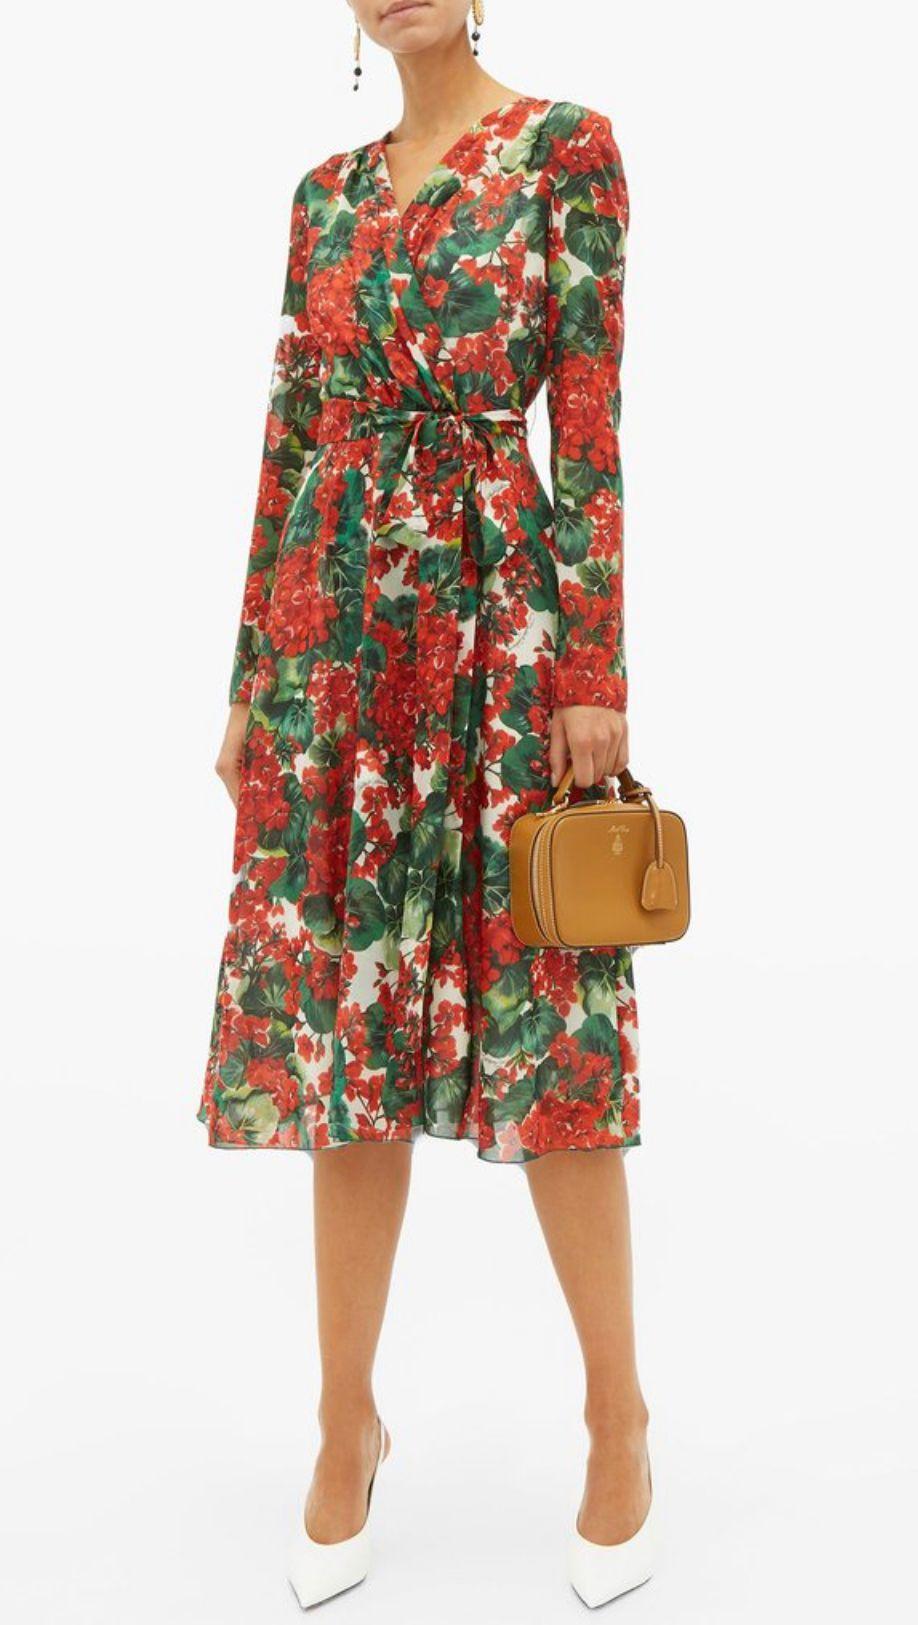 Dolce & Gabbana Red Geranium mid length dress with the belt. 
Silk white underdress 
Size 46IT - UK14- XL
93% Silk 7% Elasthan
Brand new with tags! 
Please check my other DG clothing & accessories!